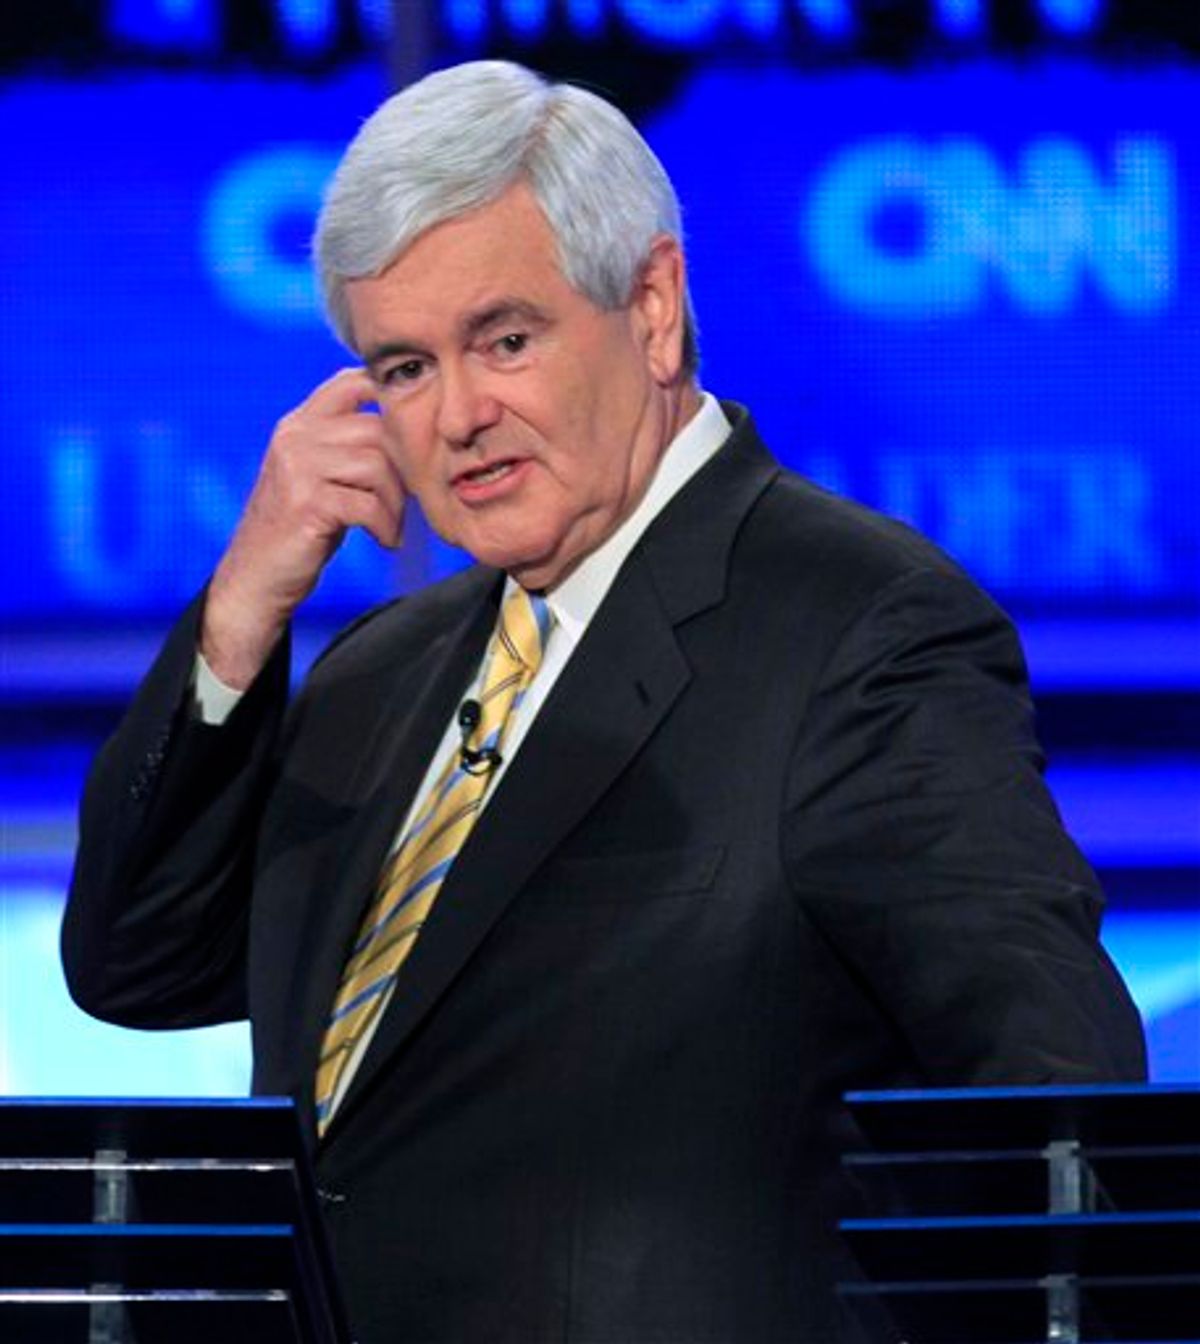 Former House Speaker Newt Gingrich is seen during a break in the first New Hampshire Republican presidential debate at St. Anselm College in Manchester, N.H., Monday, June 13, 2011. (AP Photo/Jim Cole) (AP)